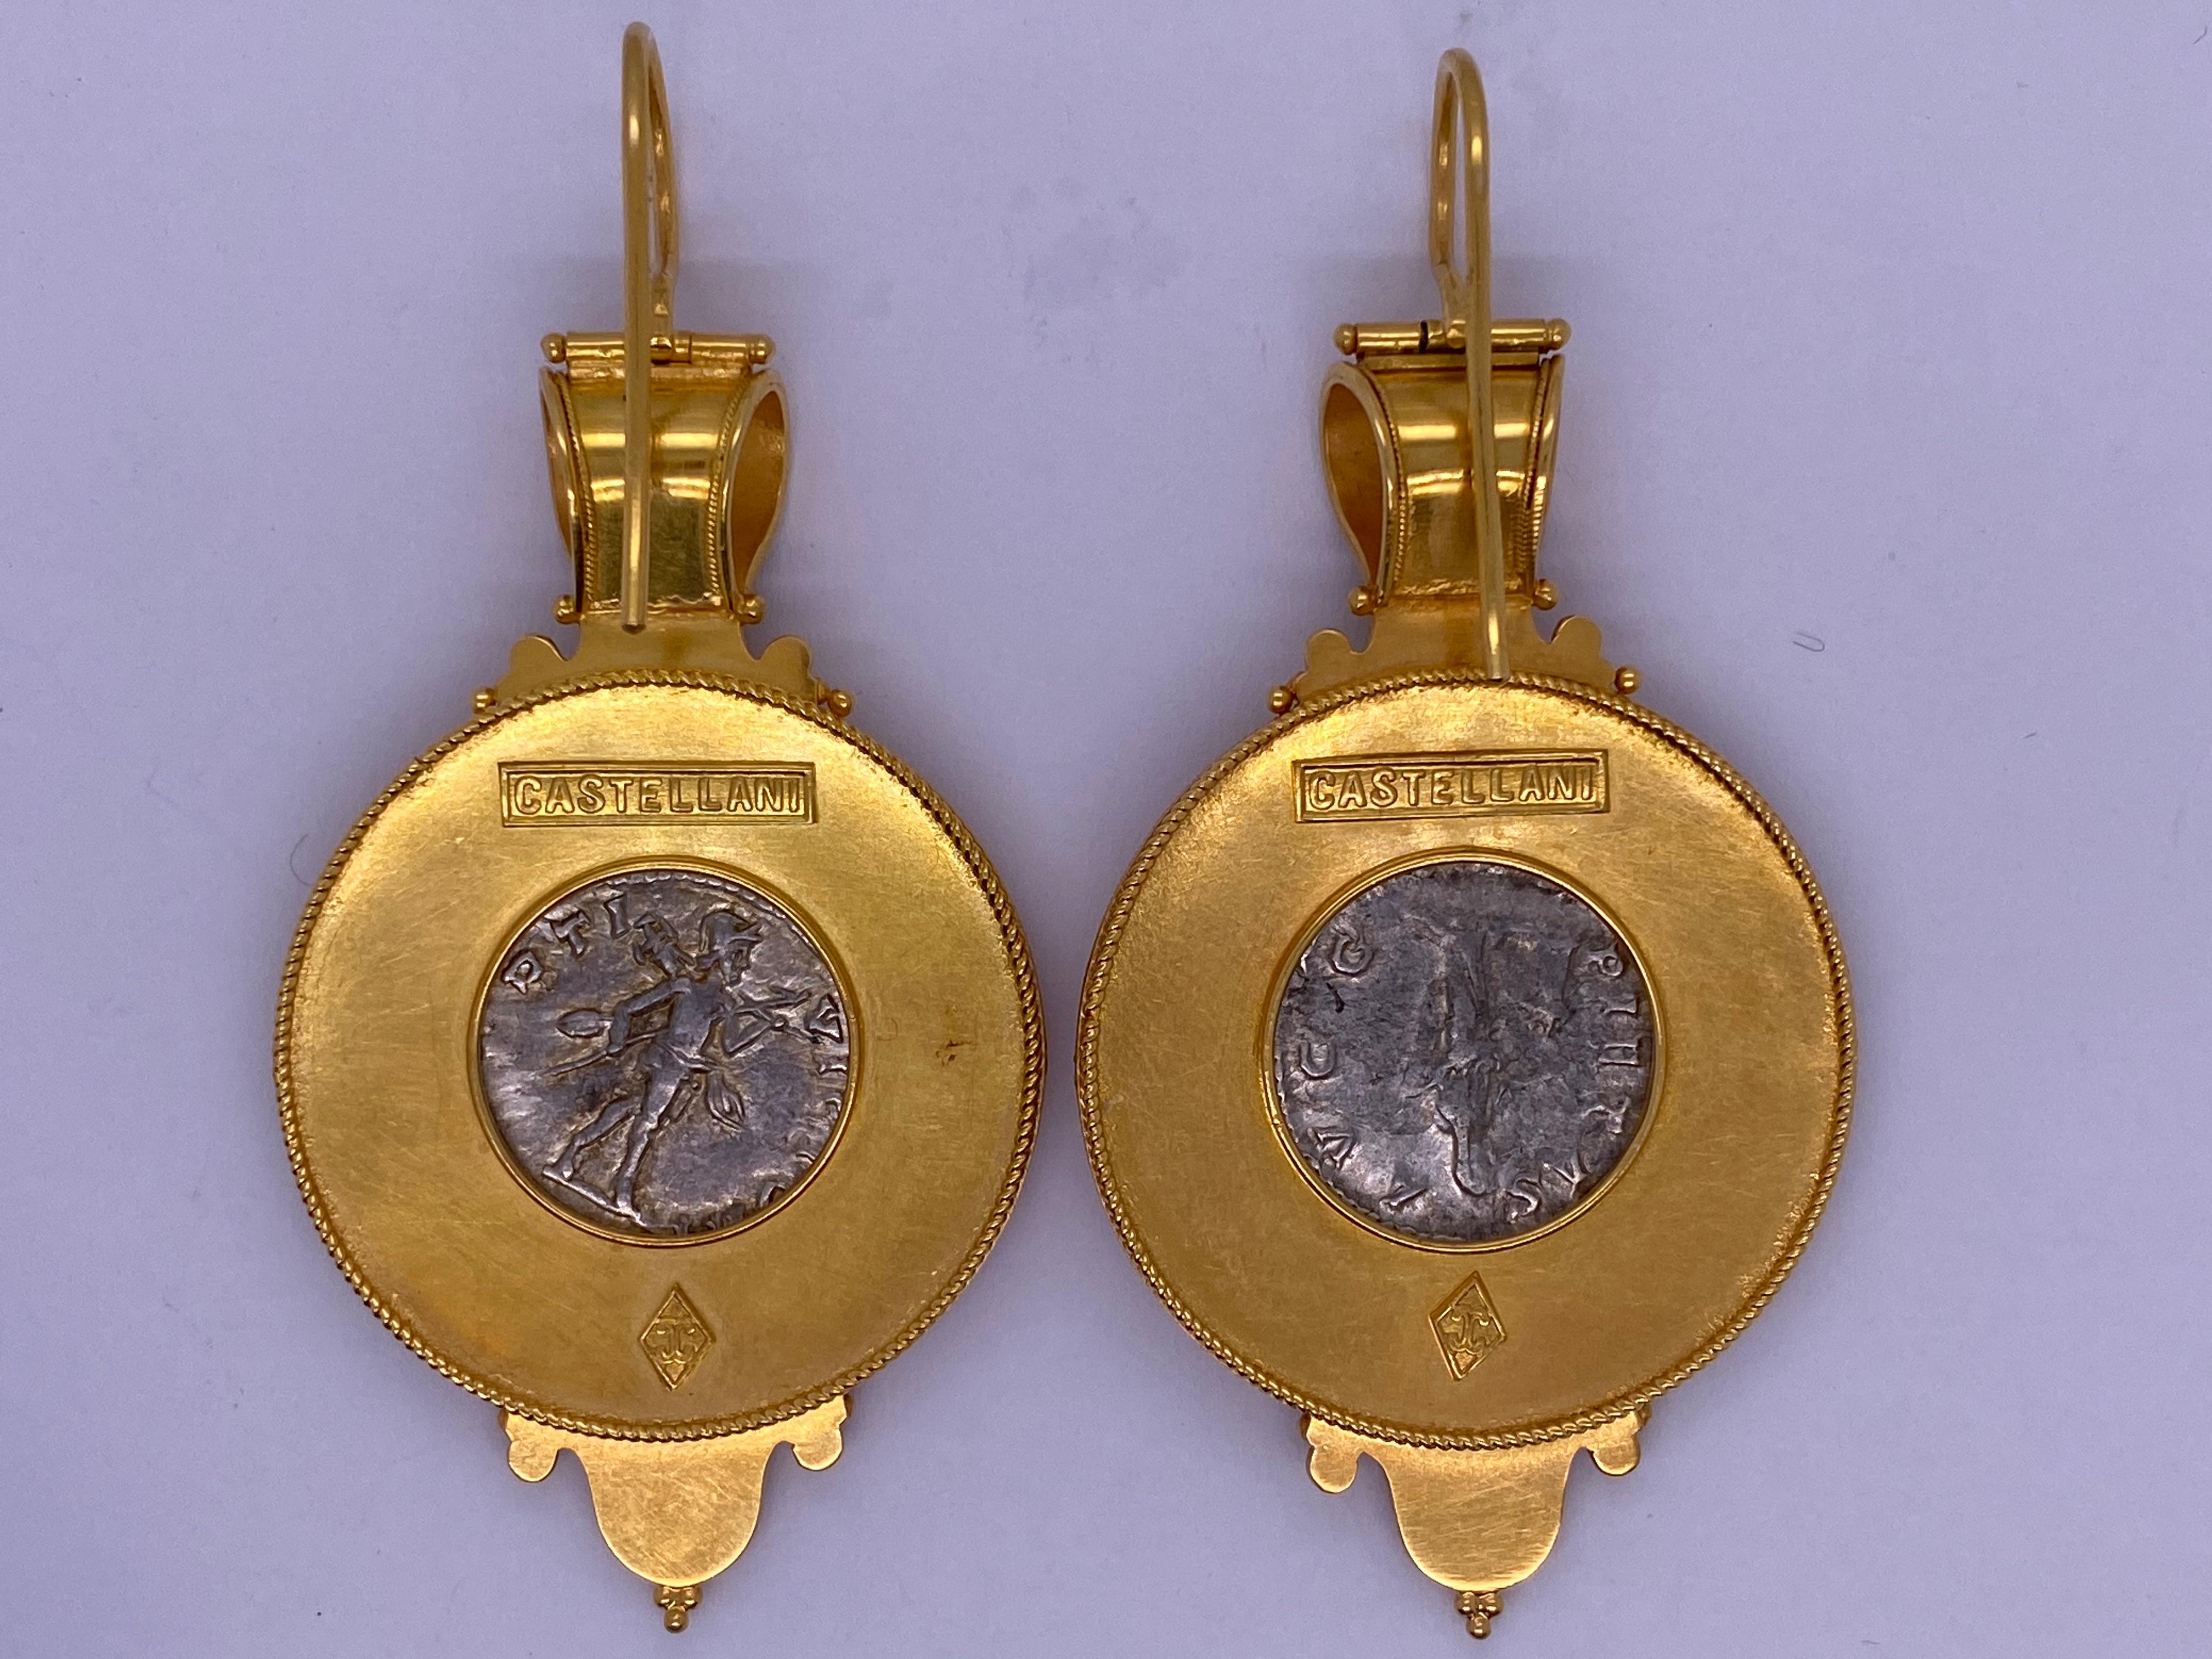 Etruscan Revival Castellani Ancient Silver Greek Coins circa 300BCE 15kt Gold Bulla Earrings  For Sale